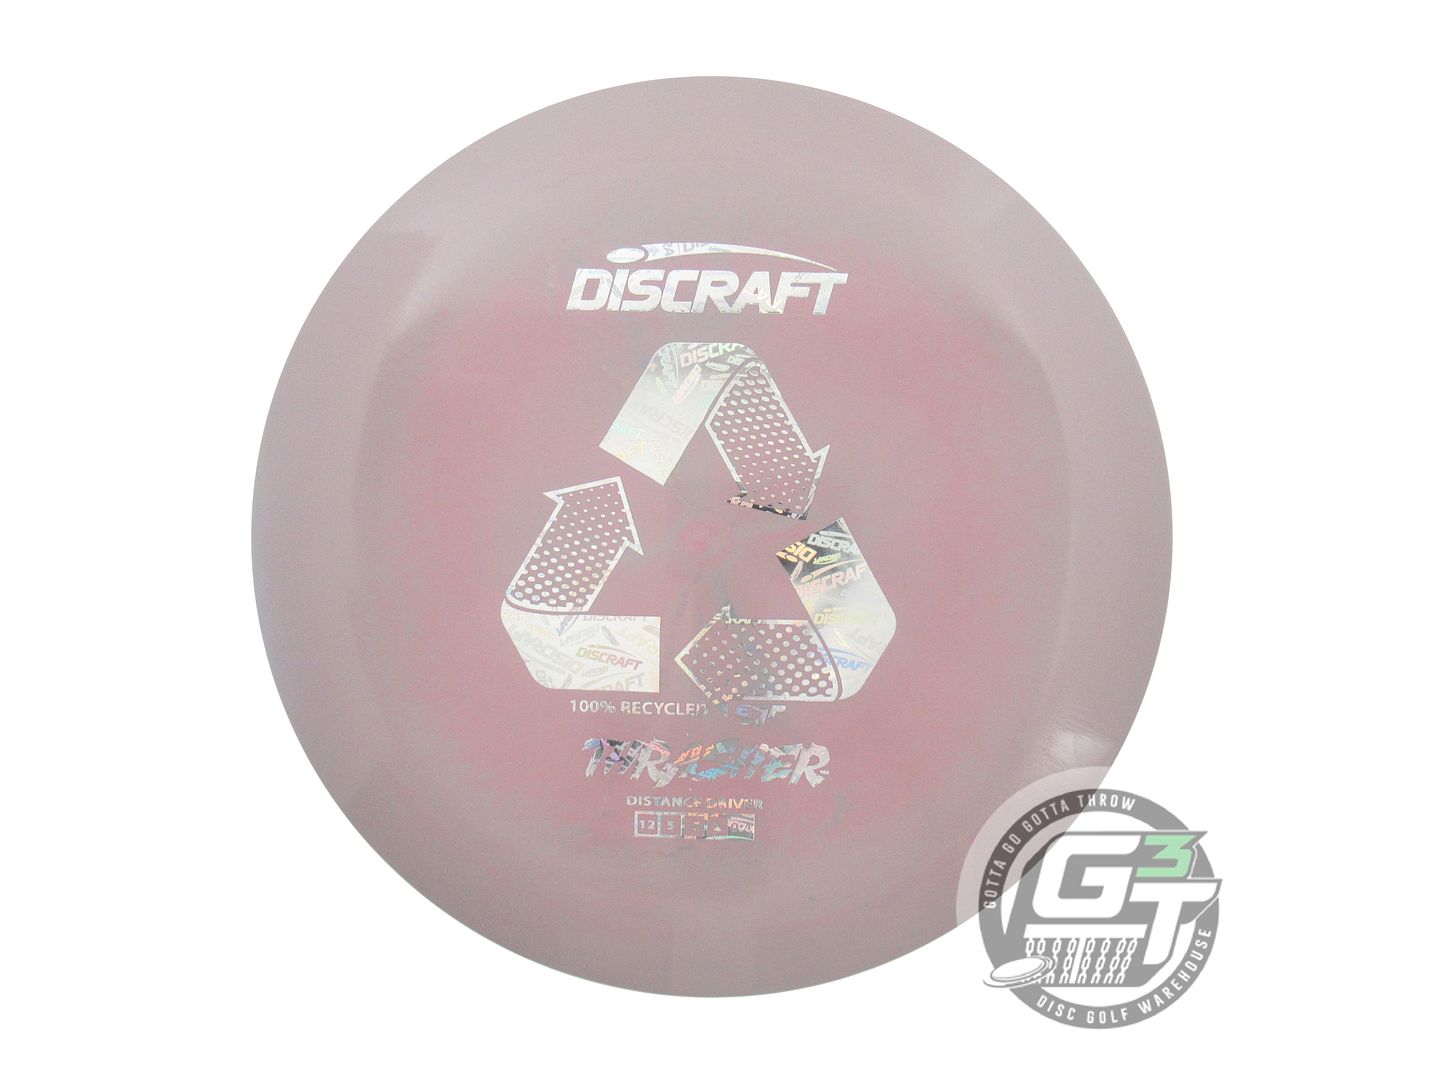 Discraft Recycled ESP Thrasher Distance Driver Golf Disc (Individually Listed)